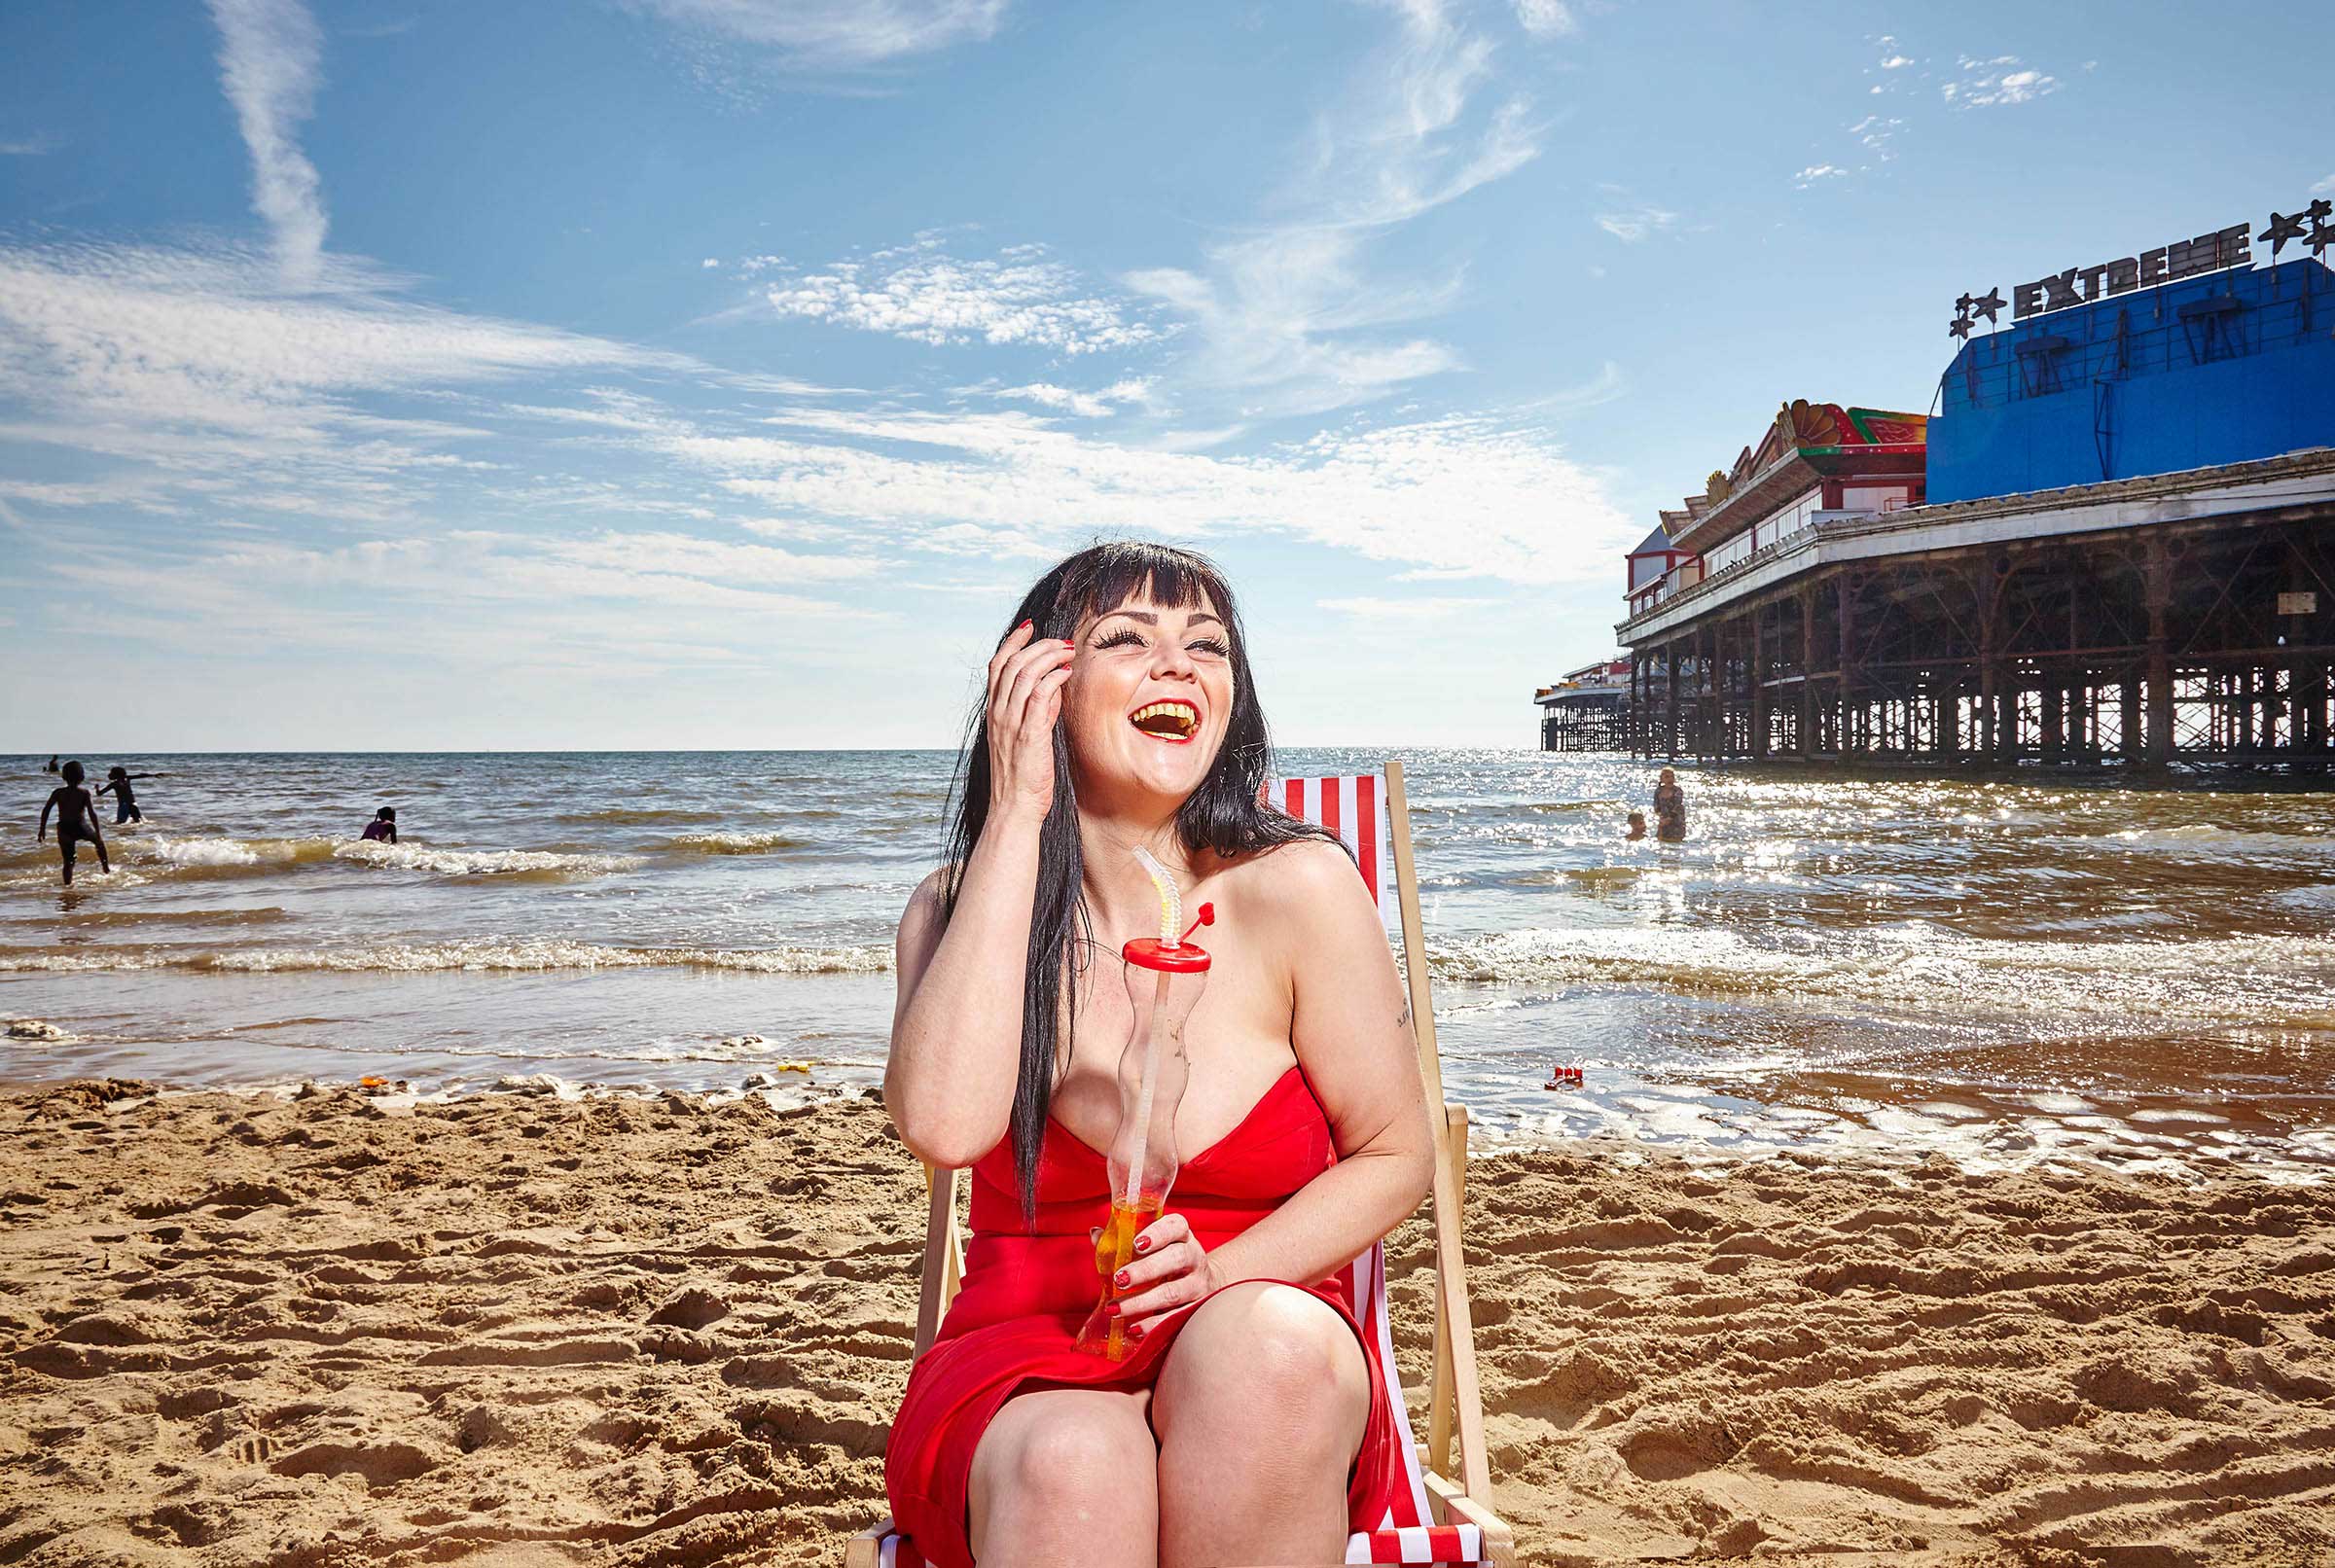 Blackpool beach lady in red dress